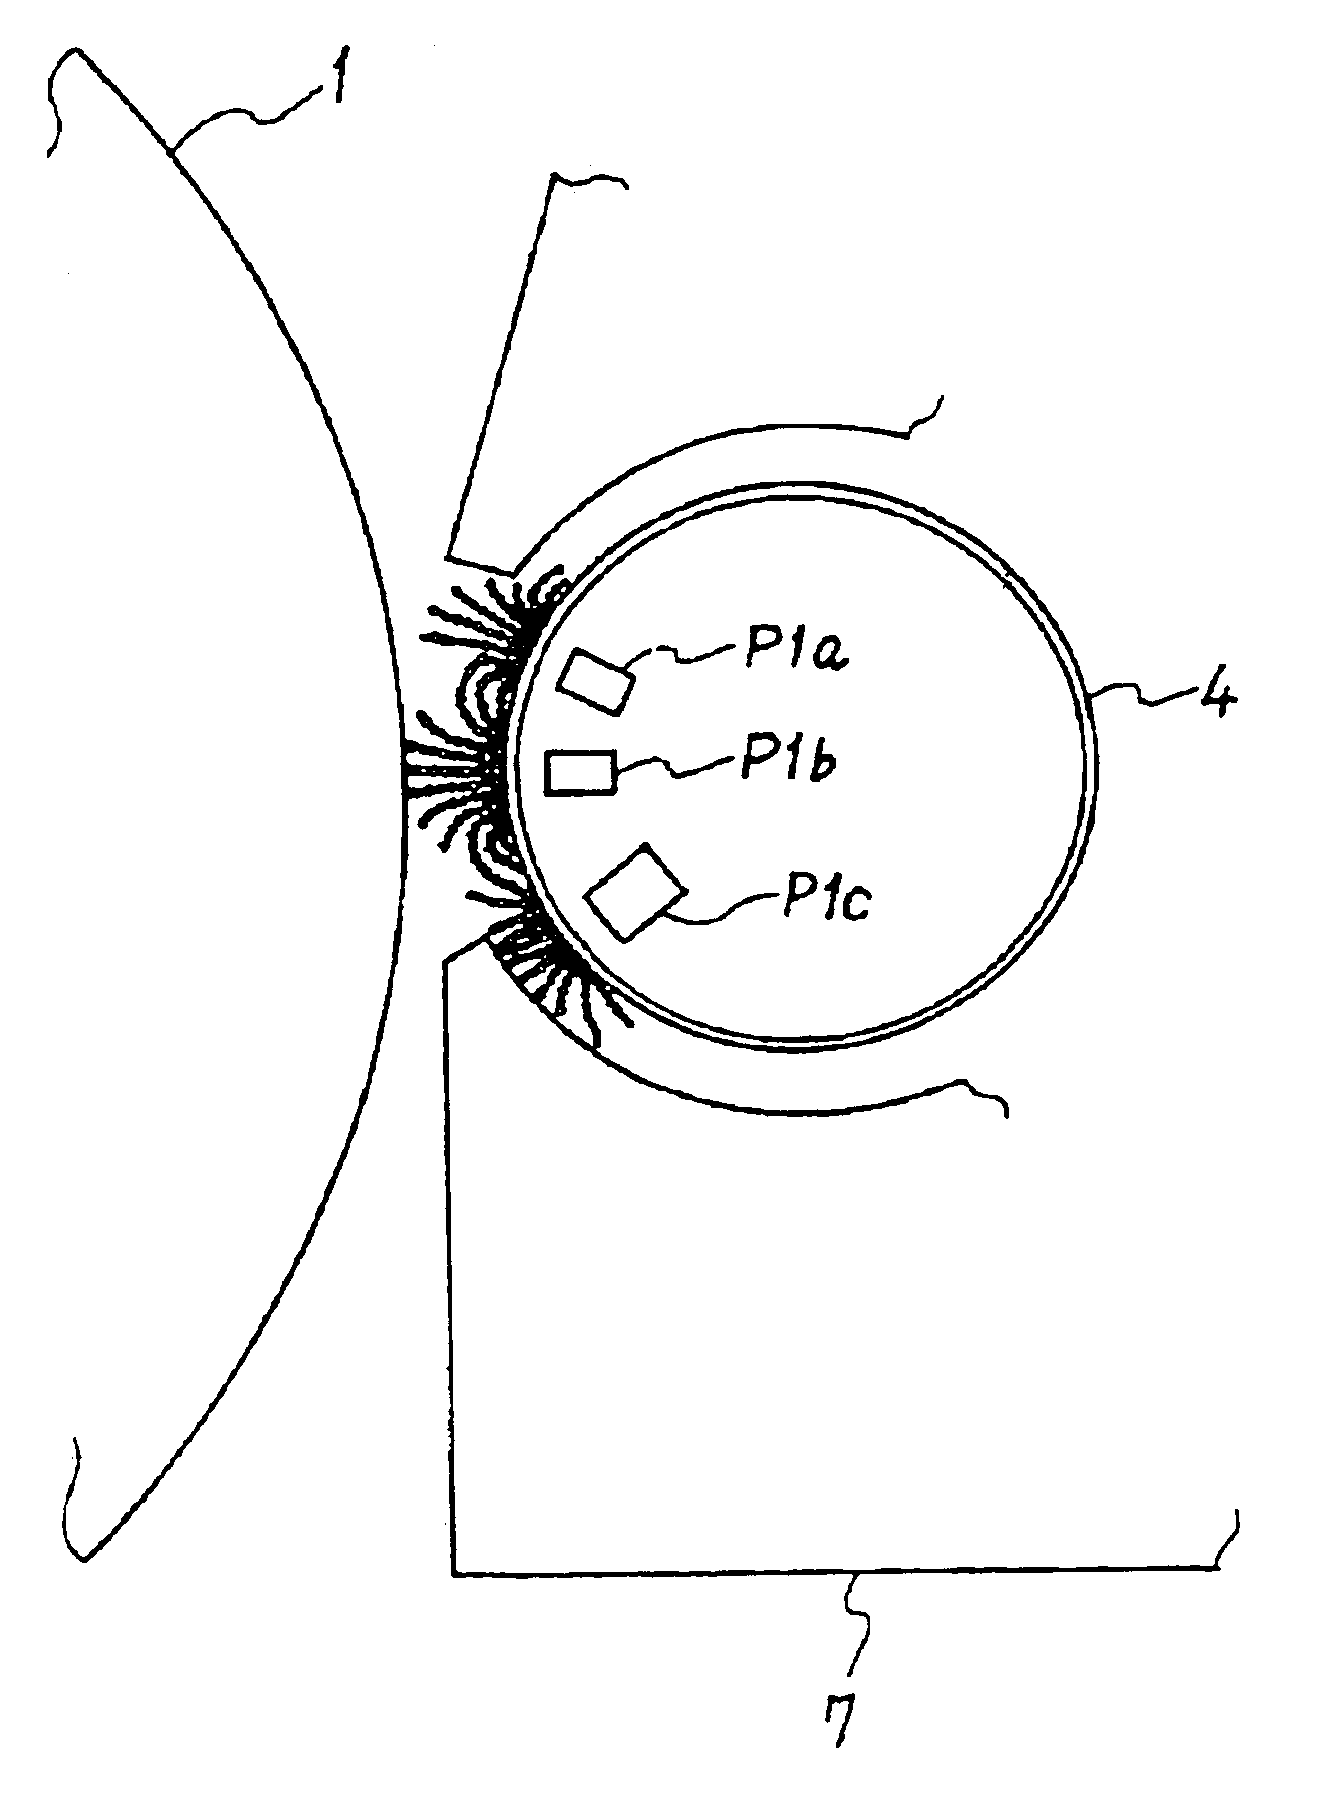 Developing device having a developer forming a magnet brush